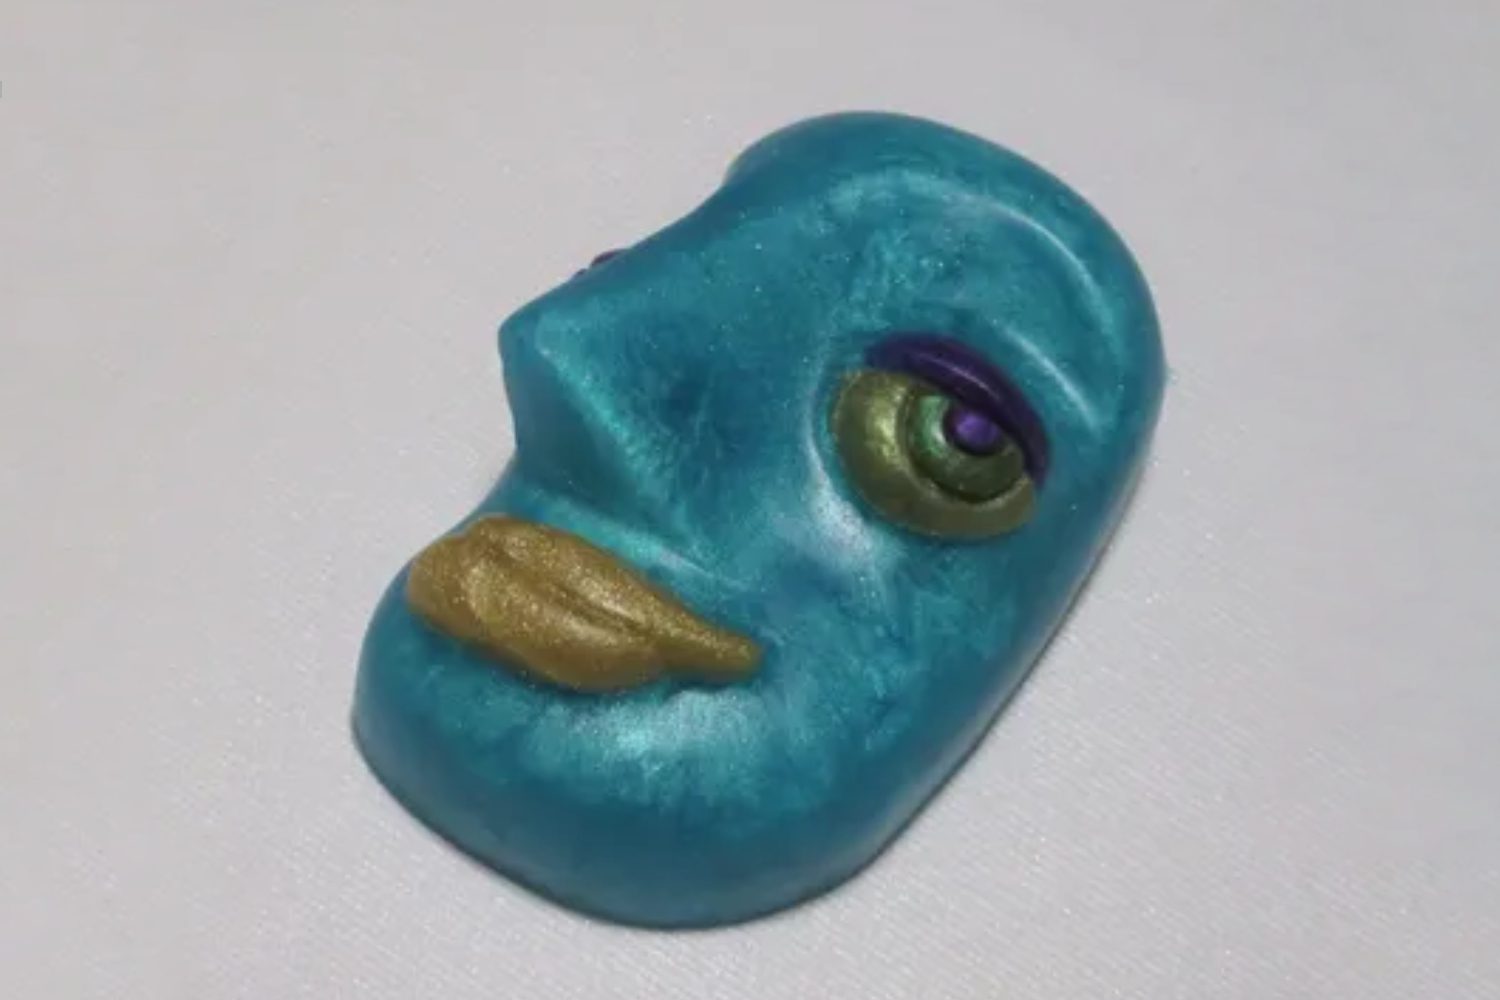 A blue face with a yellow nose and purple eye.